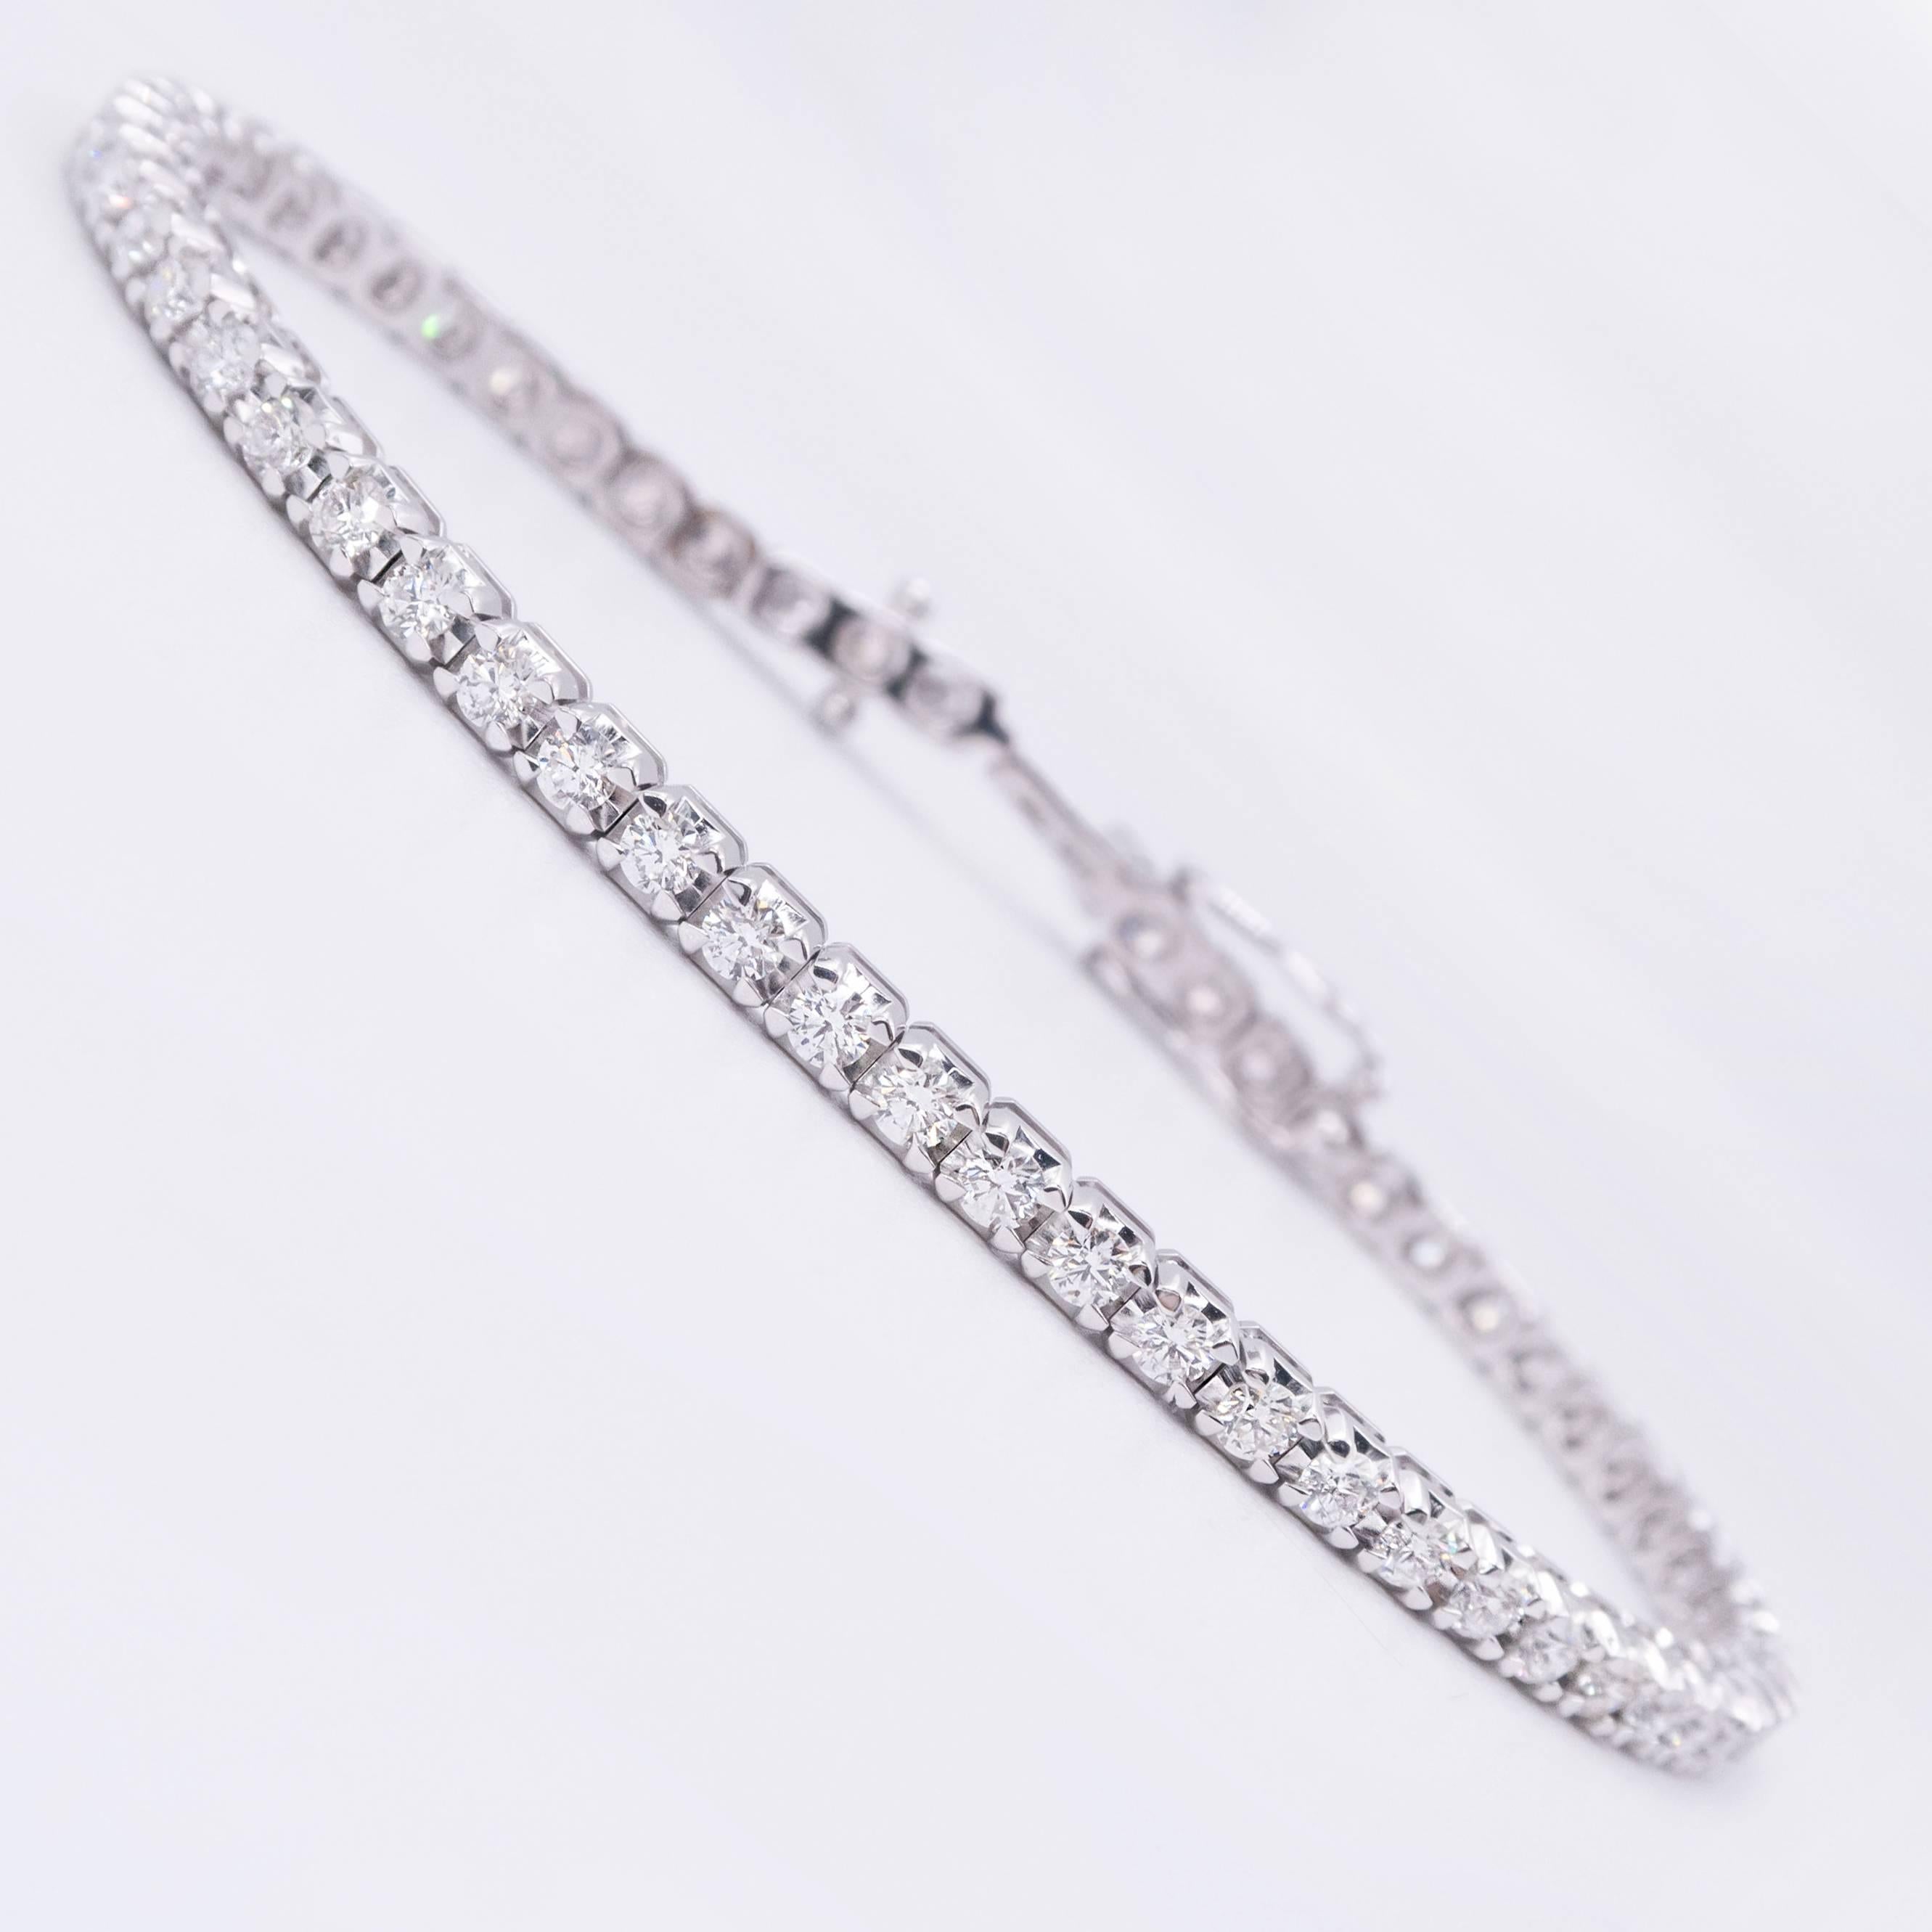 This classic 18 Karat White Gold Diamond Tennis Bracelet is set with 51 round, Brilliant Cut VS12, E-F-G Diamonds totaling 3.62 carats by gauge and formula.

Each Diamond is set with 4 tiny prongs inside the larger Illusion Setting, giving the